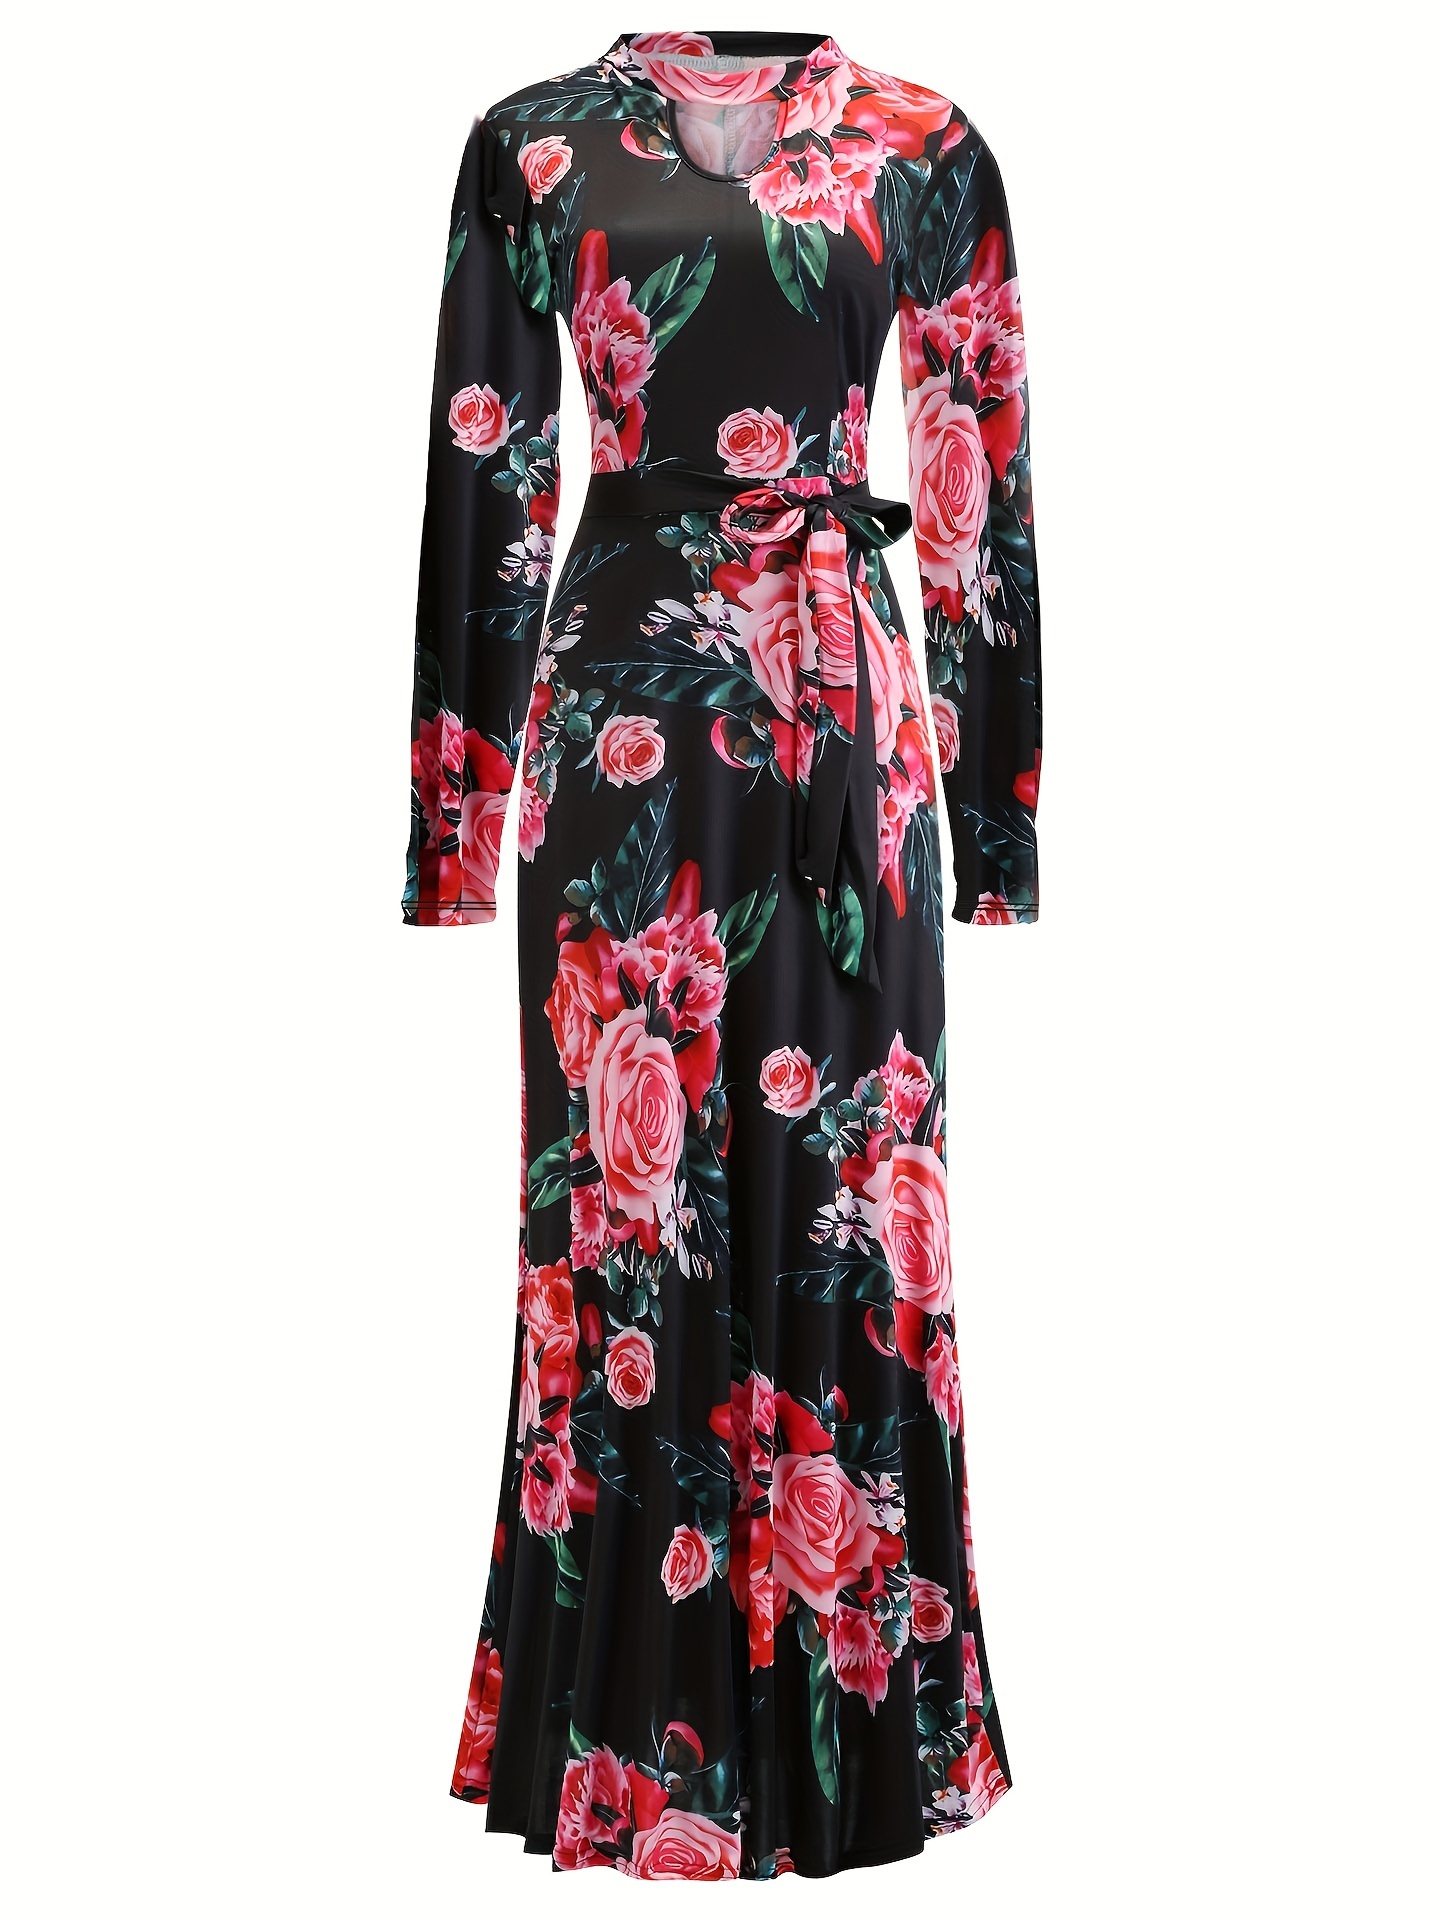 floral print pleated dress elegant long sleeve maxi party dress womens clothing